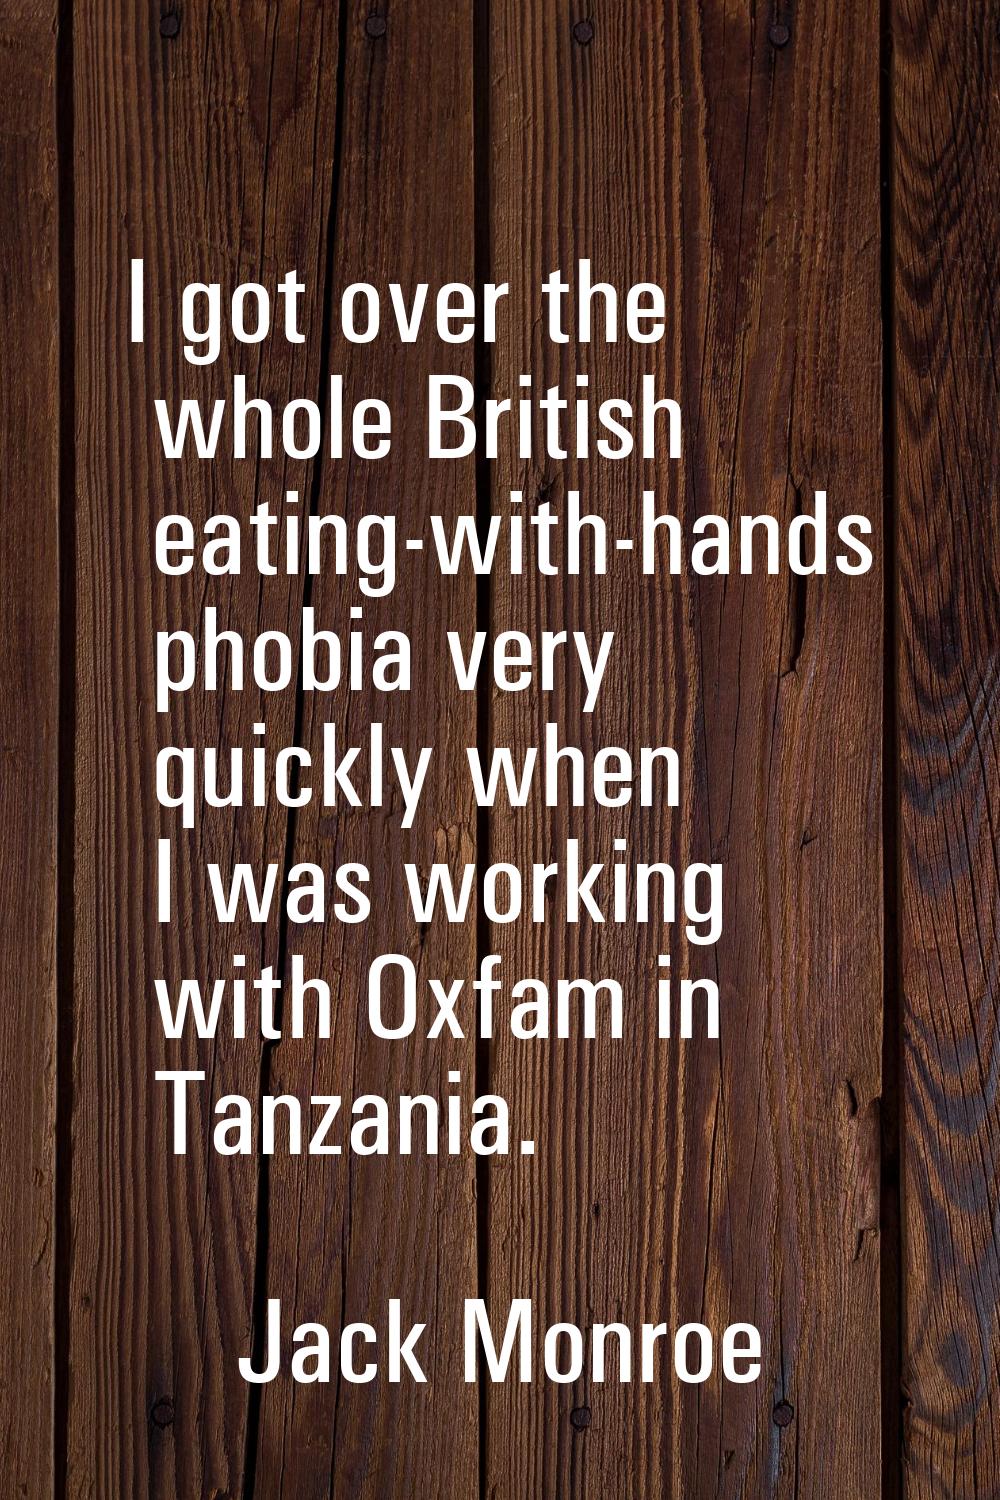 I got over the whole British eating-with-hands phobia very quickly when I was working with Oxfam in